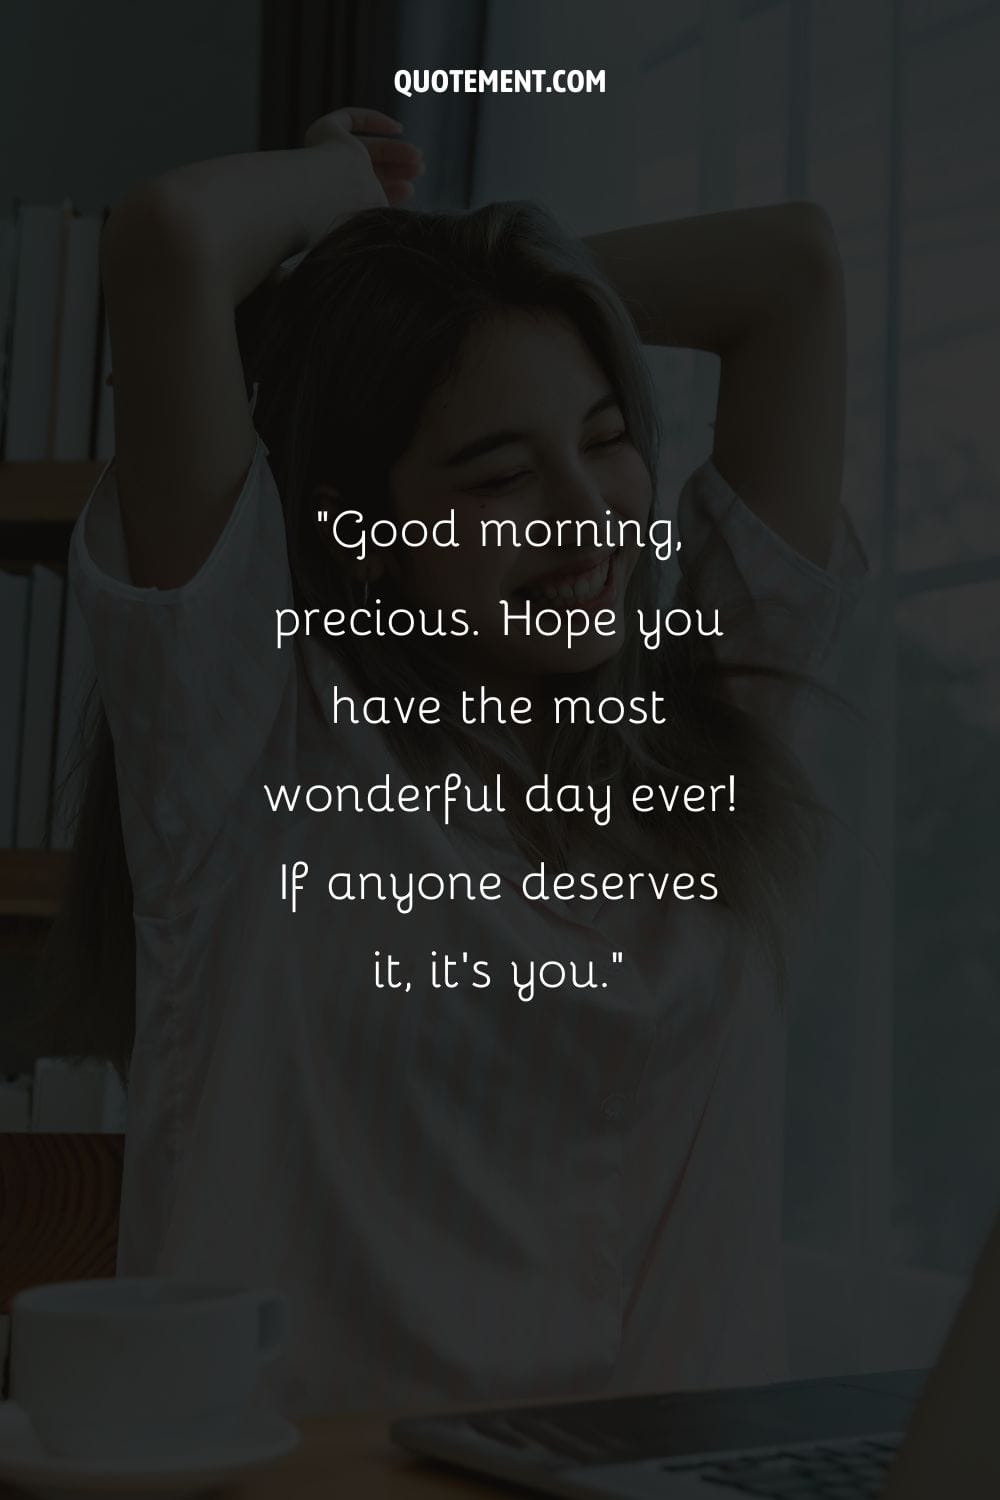 Good morning, precious. Hope you have the most wonderful day ever! If anyone deserves it, it's you